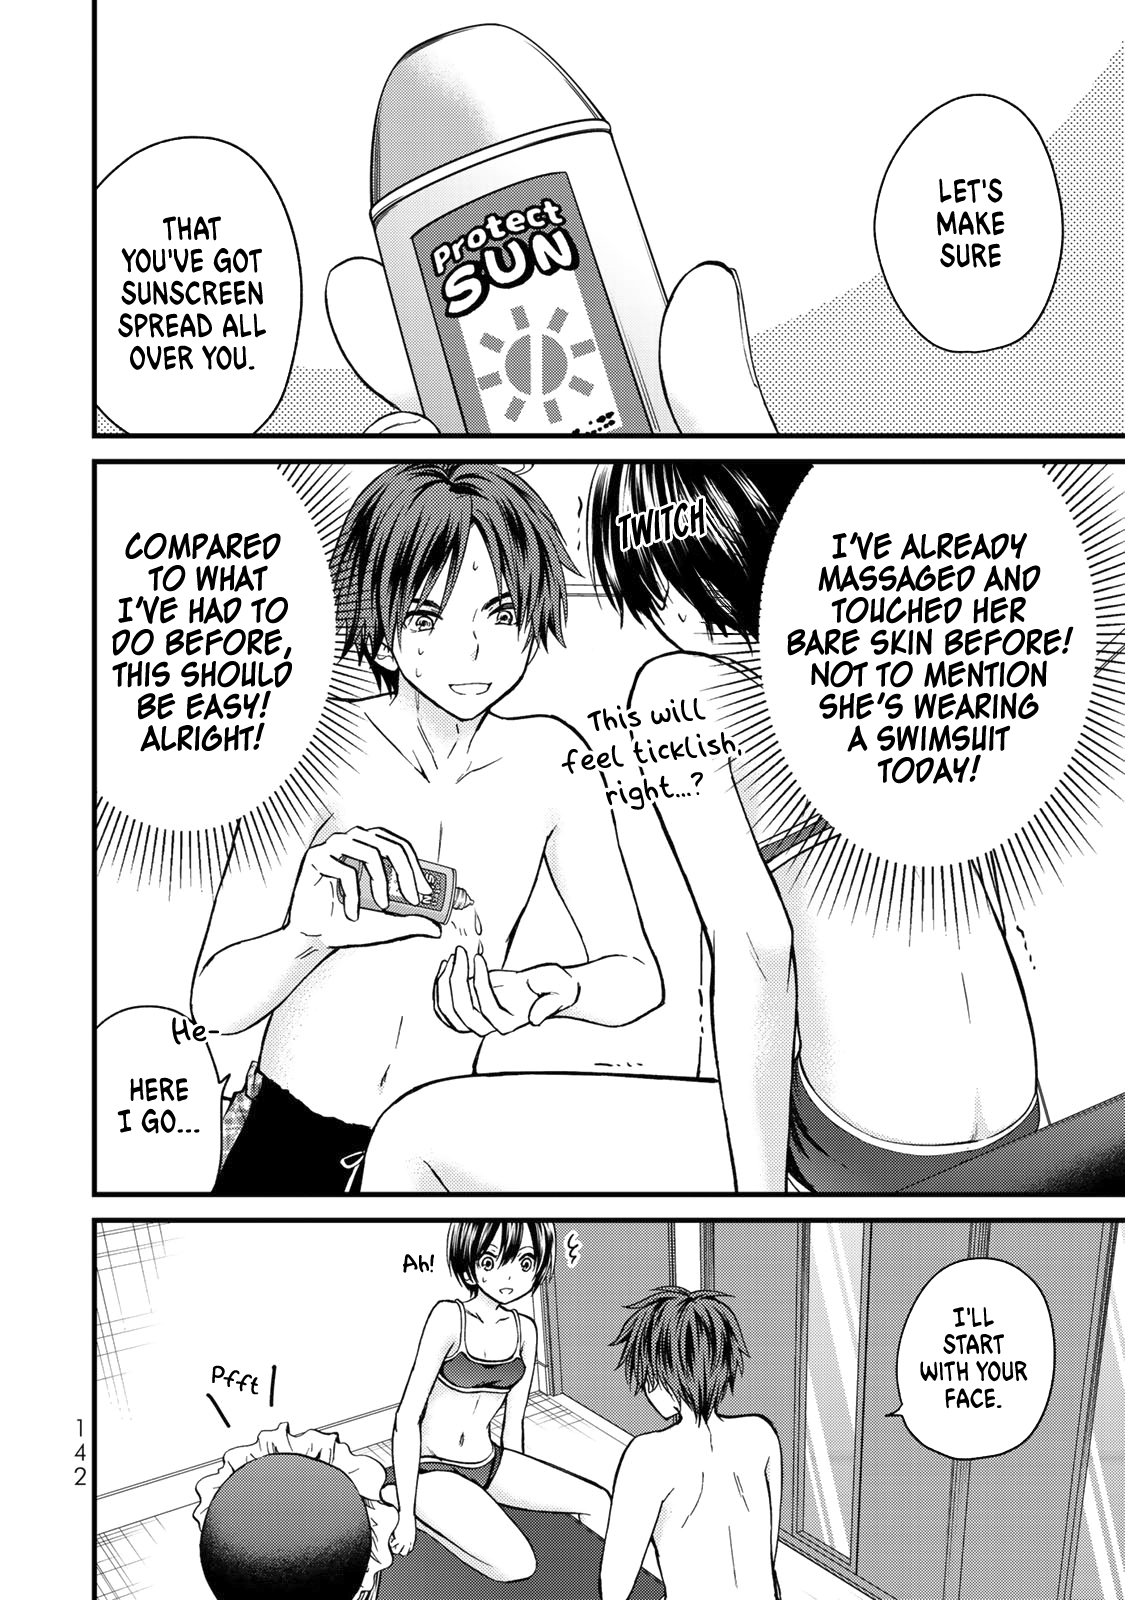 Ojousama No Shimobe Vol.3 Chapter 28: Let's Apply It Well - Picture 3